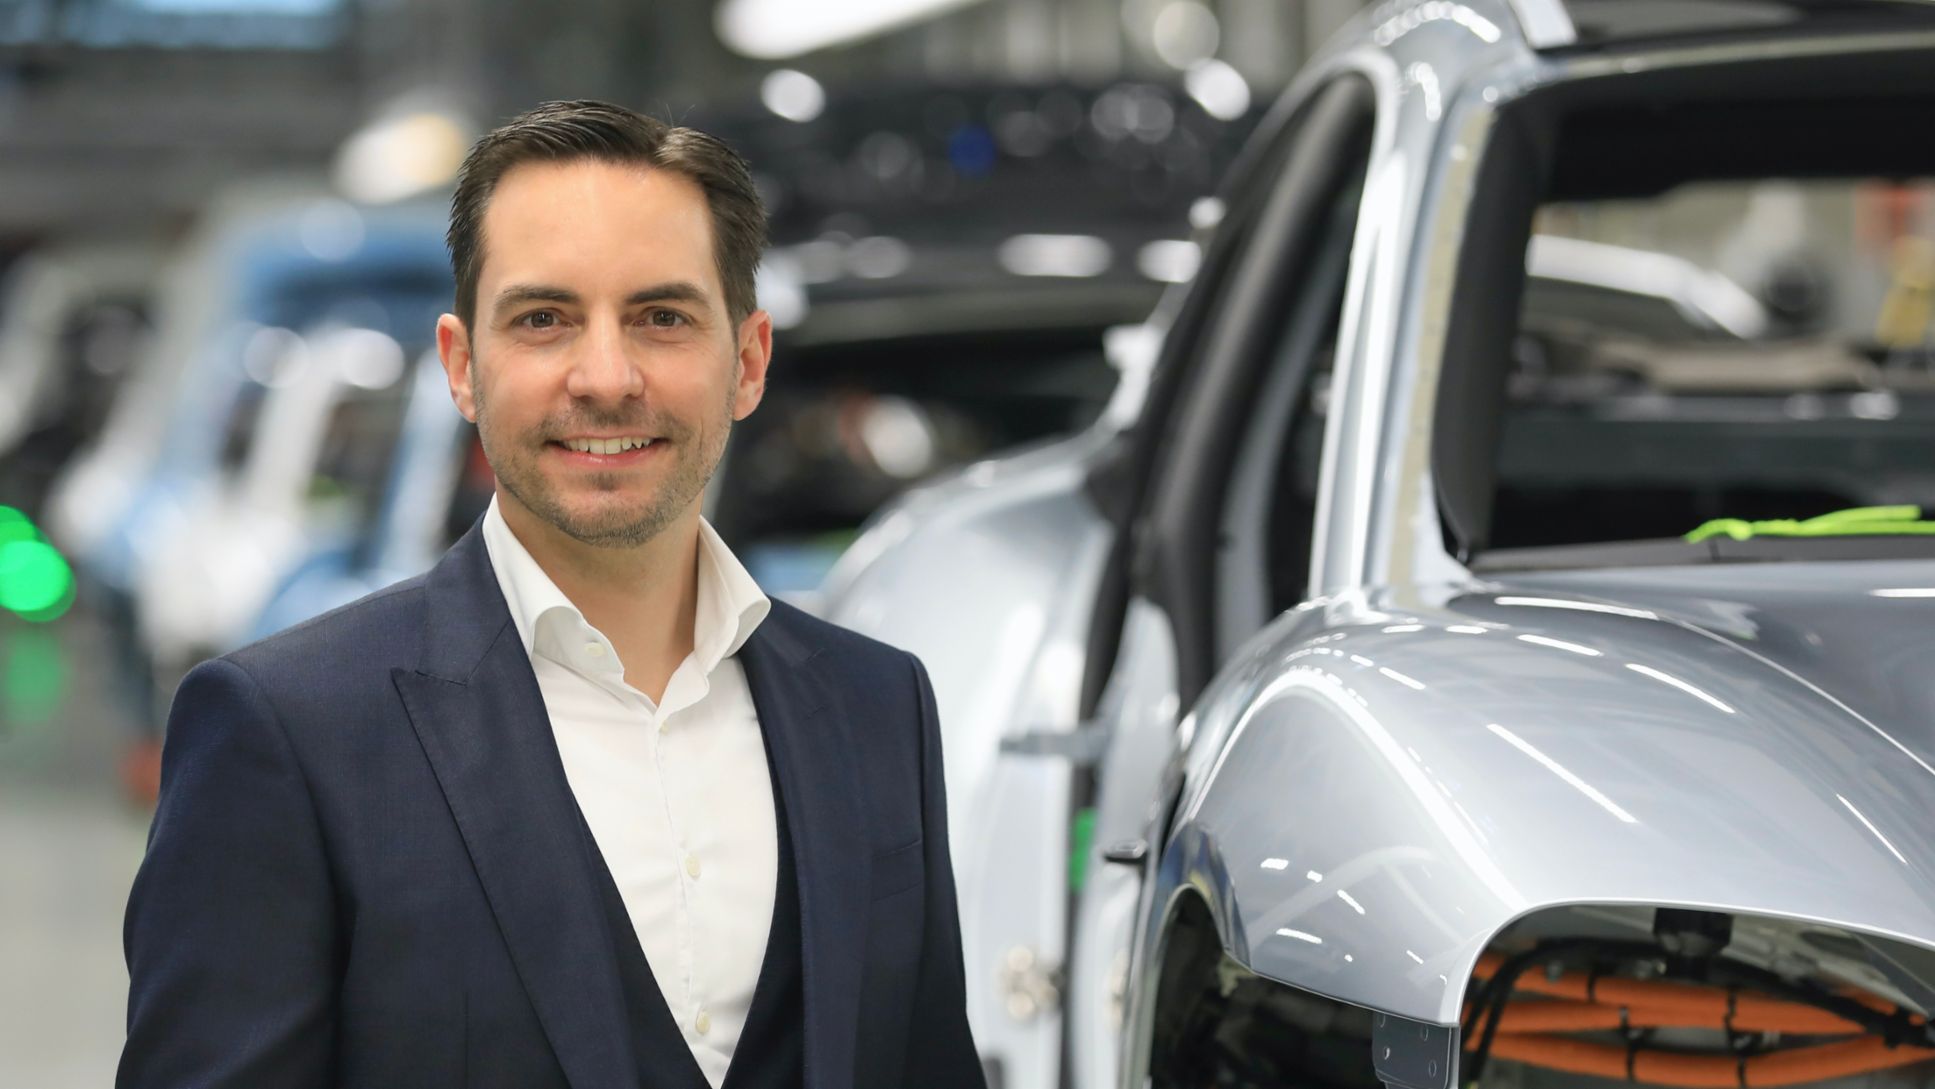 Jens Brücker, Vice president of the traditional plant at the headquarters in Zuffenhausen, 2020, Porsche AG